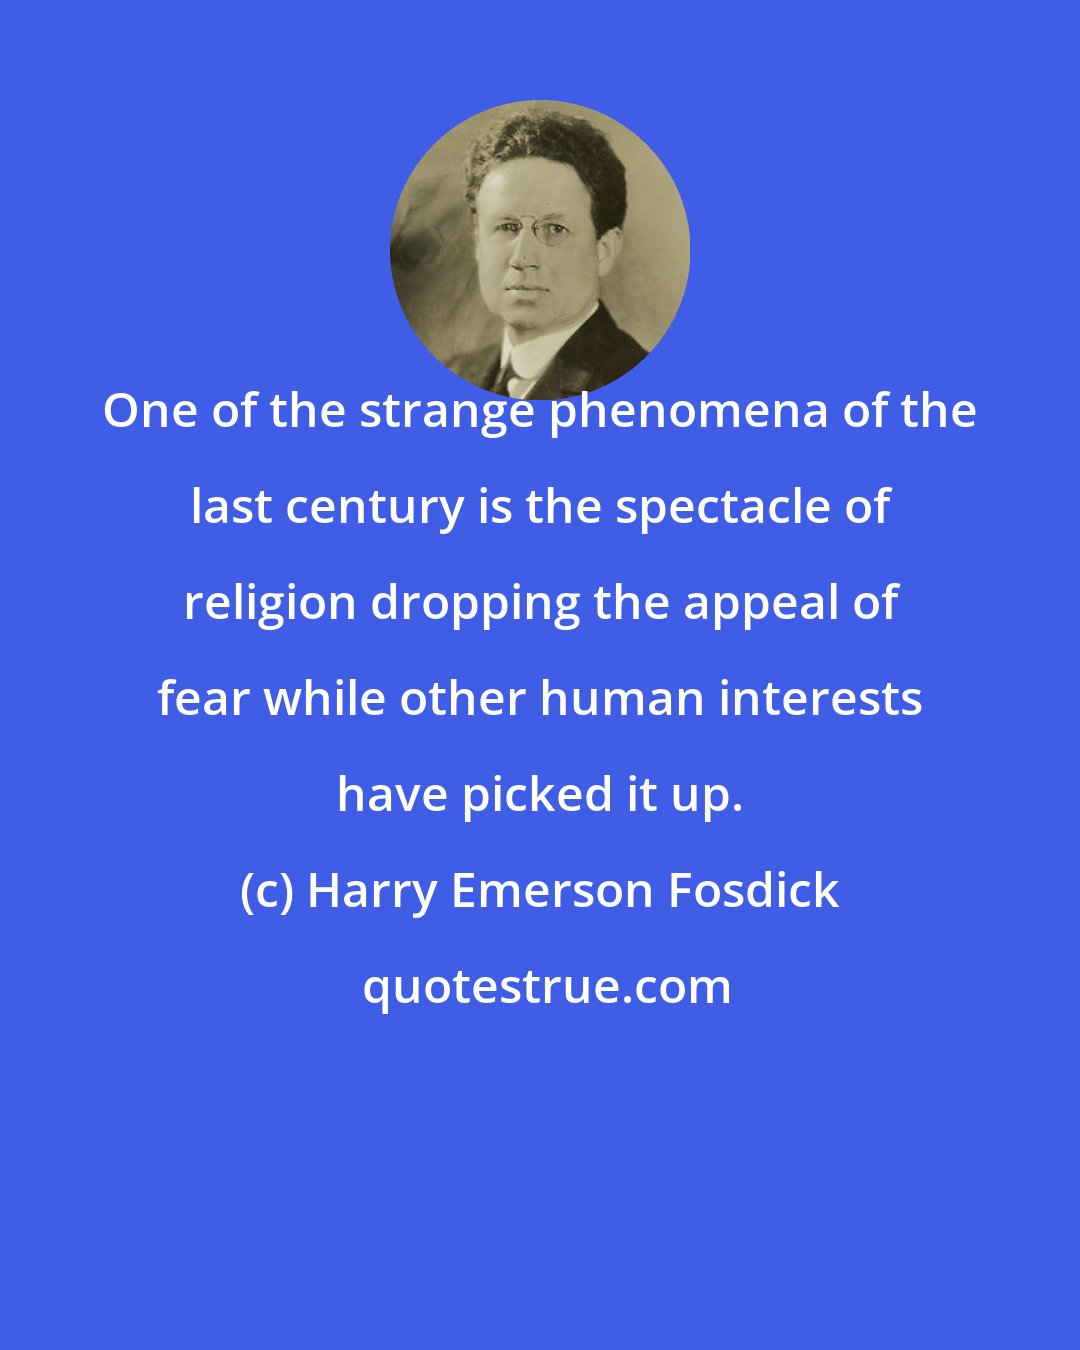 Harry Emerson Fosdick: One of the strange phenomena of the last century is the spectacle of religion dropping the appeal of fear while other human interests have picked it up.